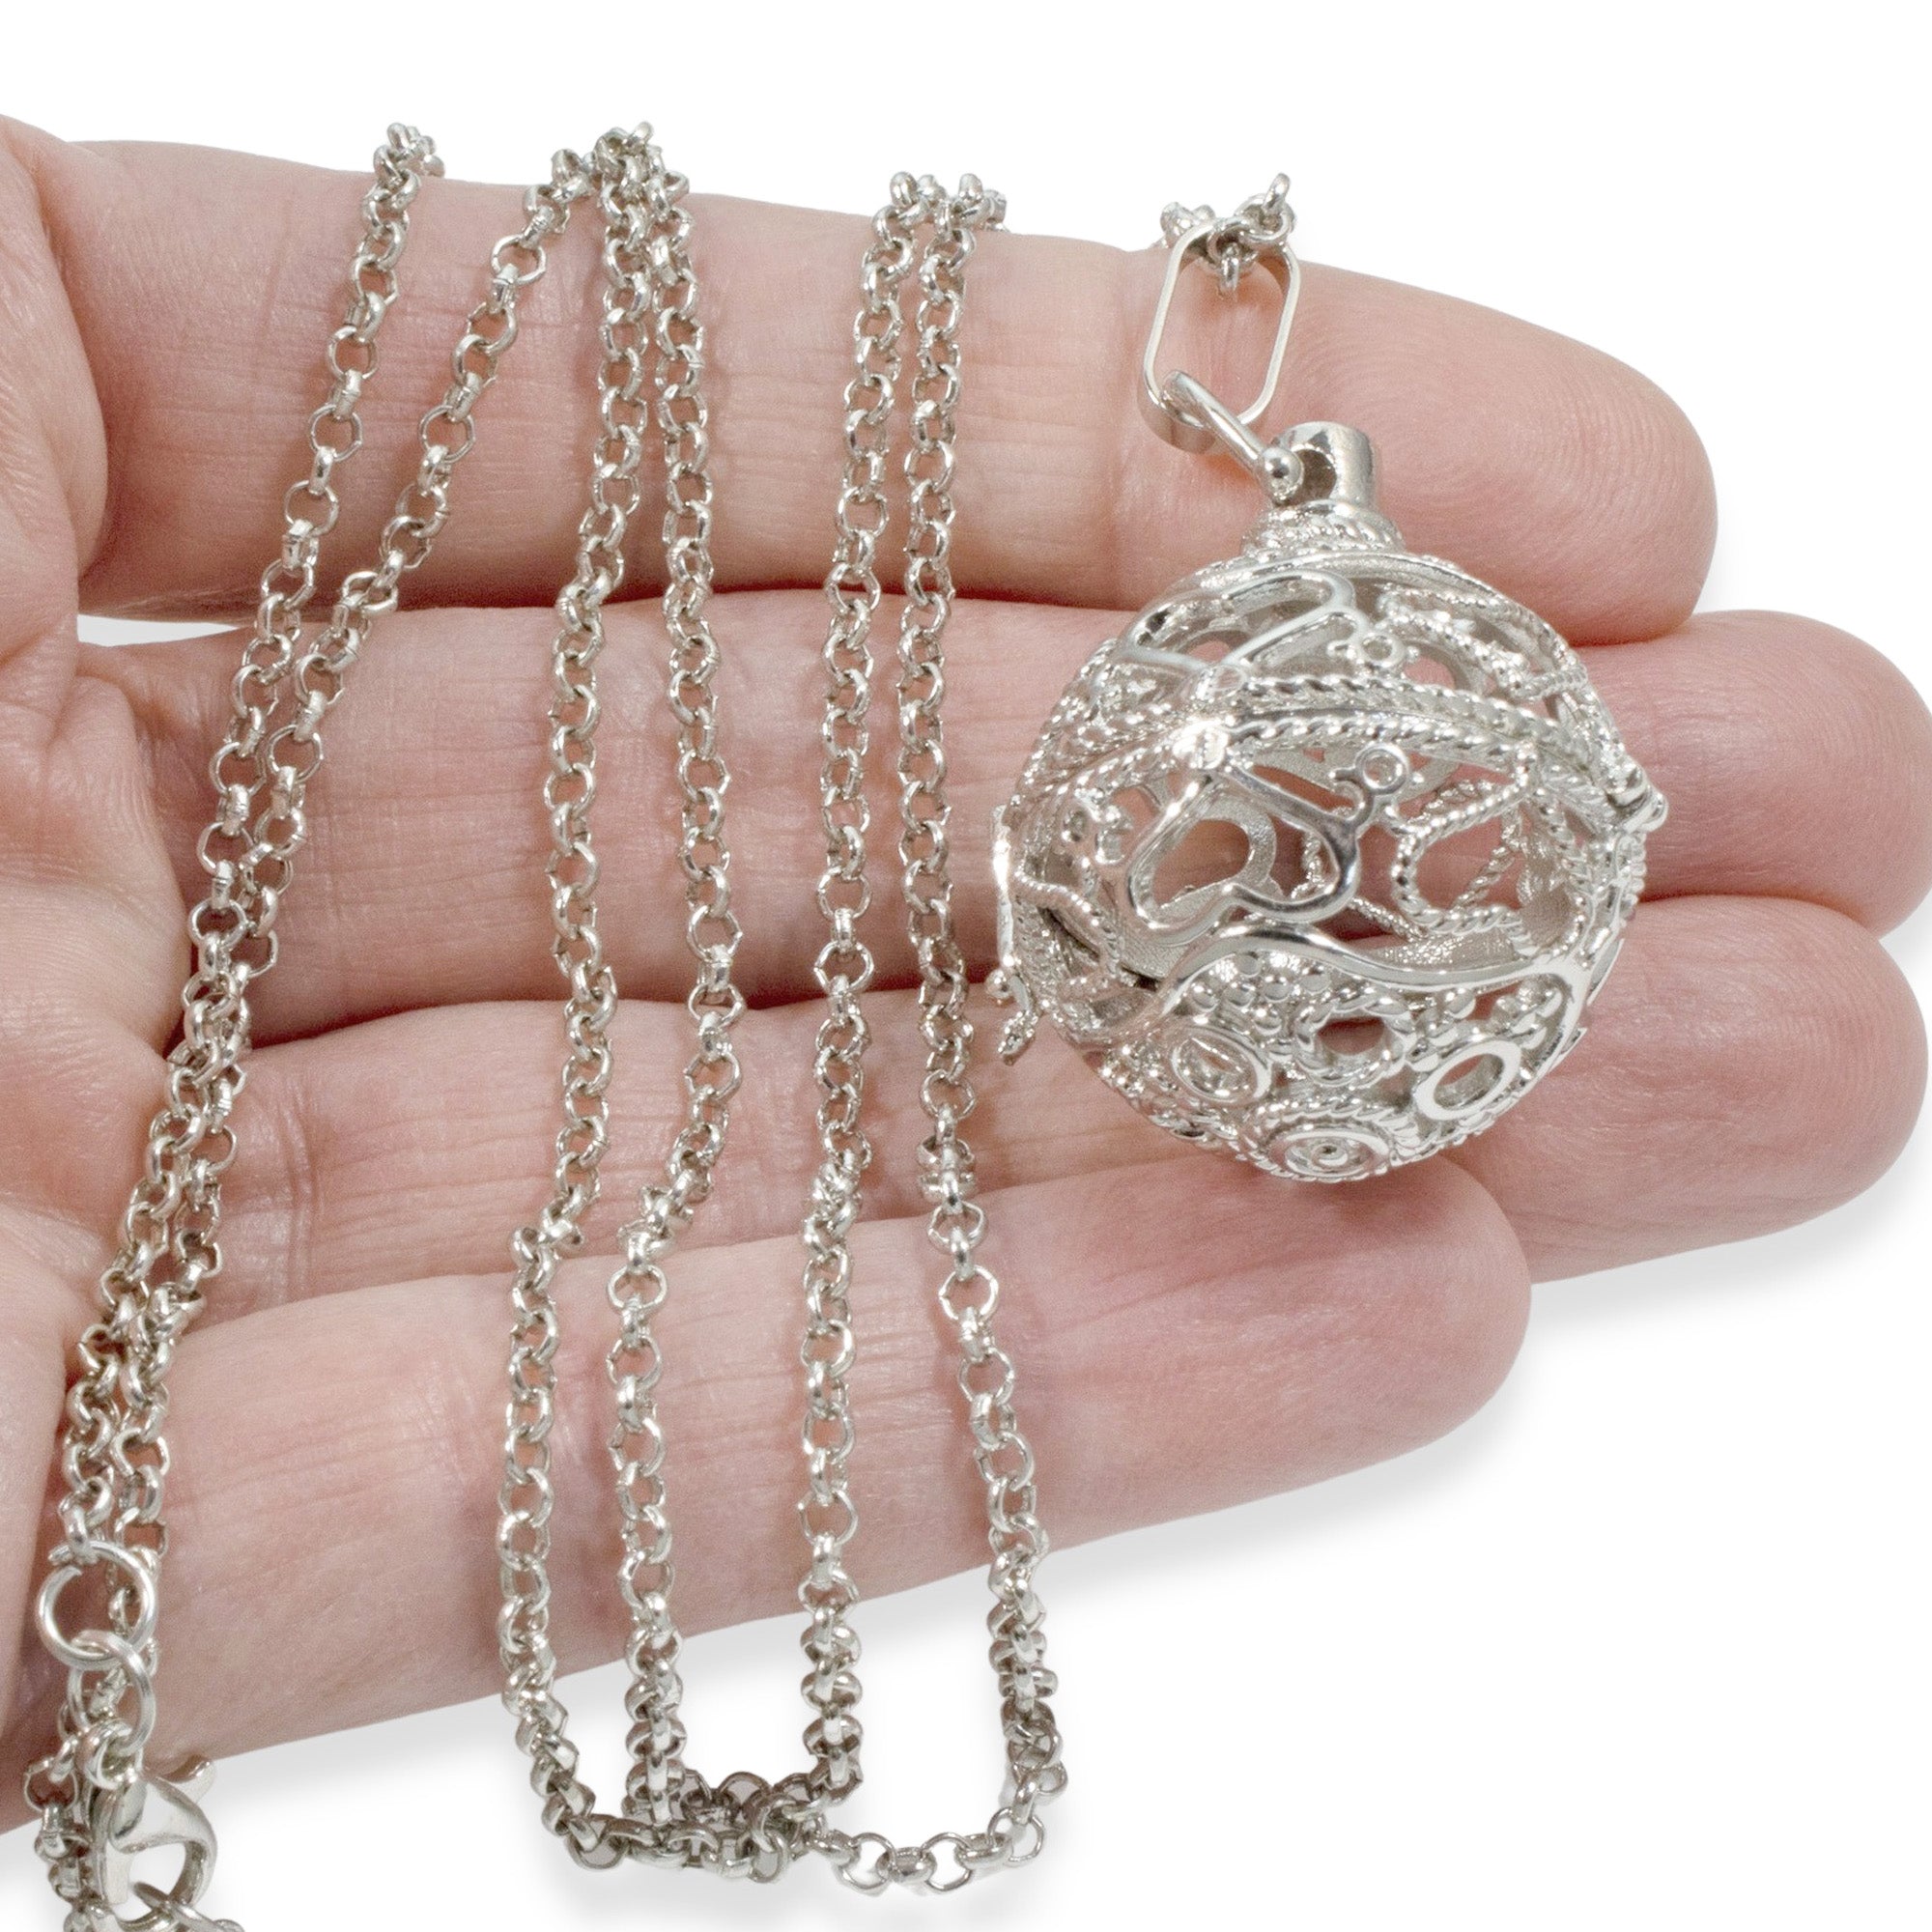 Crystal Memory Locket Necklace - Living Floating Charm | ...